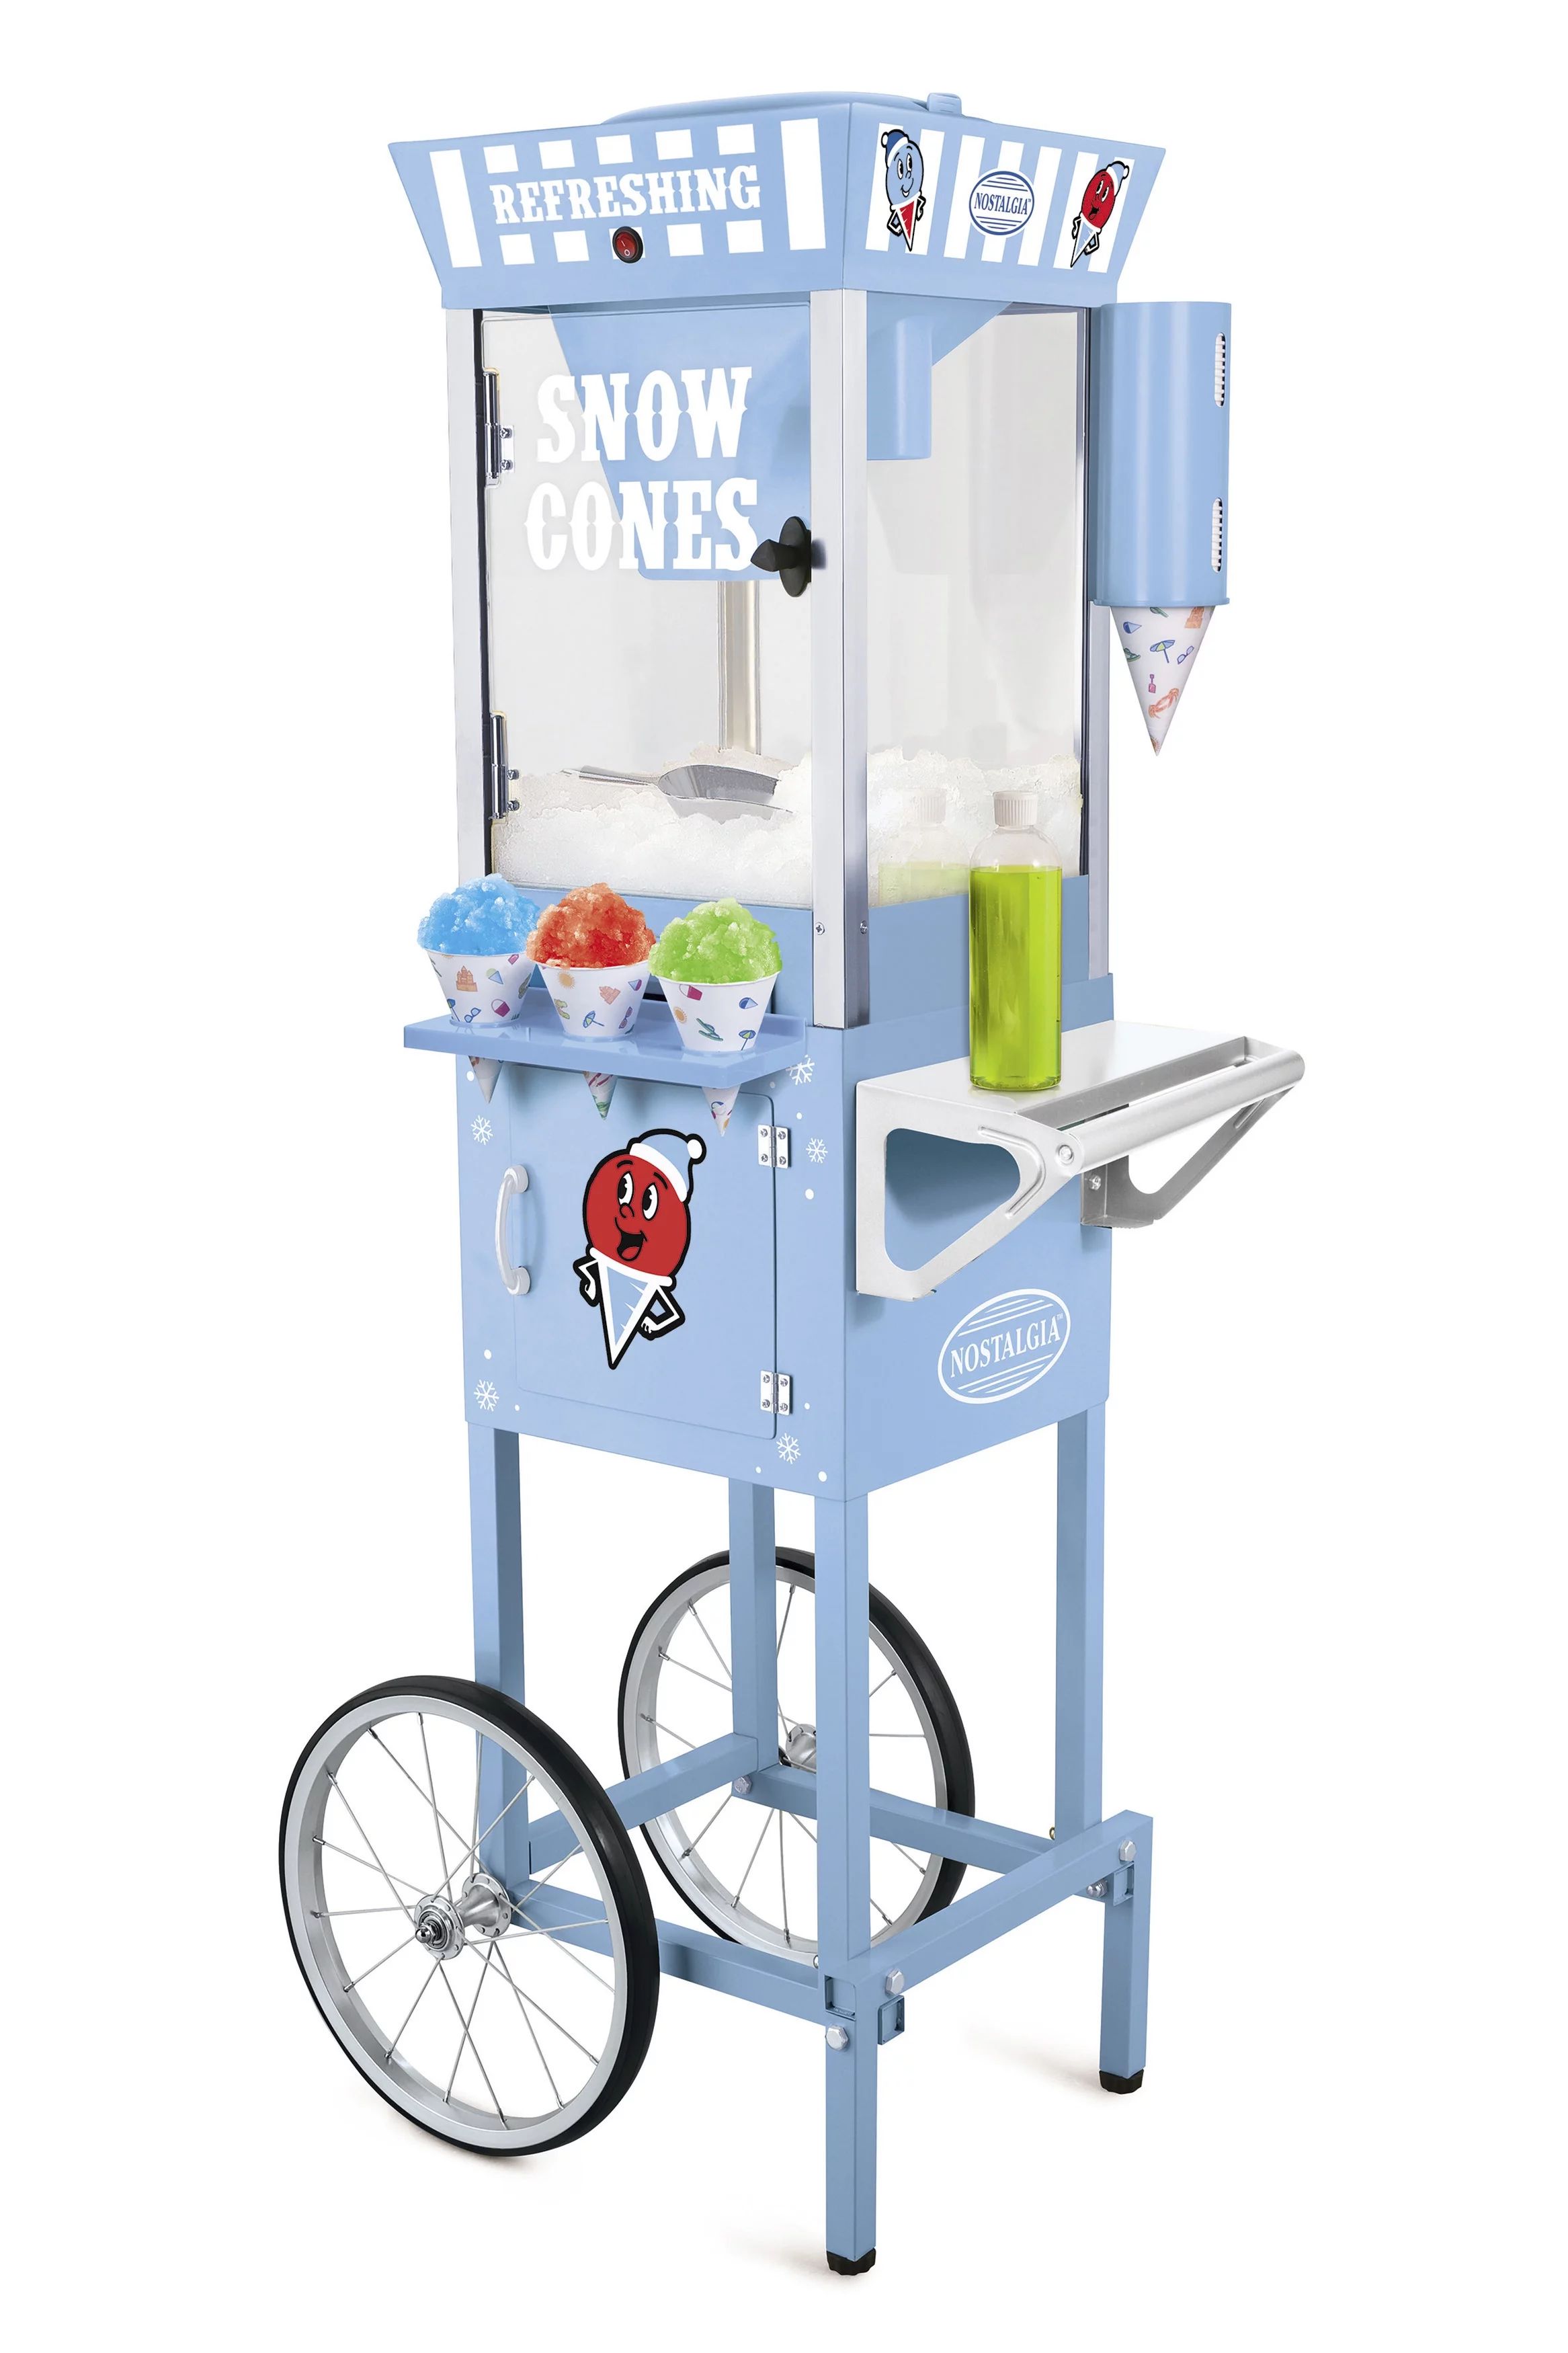 Nostalgia SCC200 54-Inch Tall Snow Cone Cart Makes 72 Icy Treats, Blue | Walmart (US)